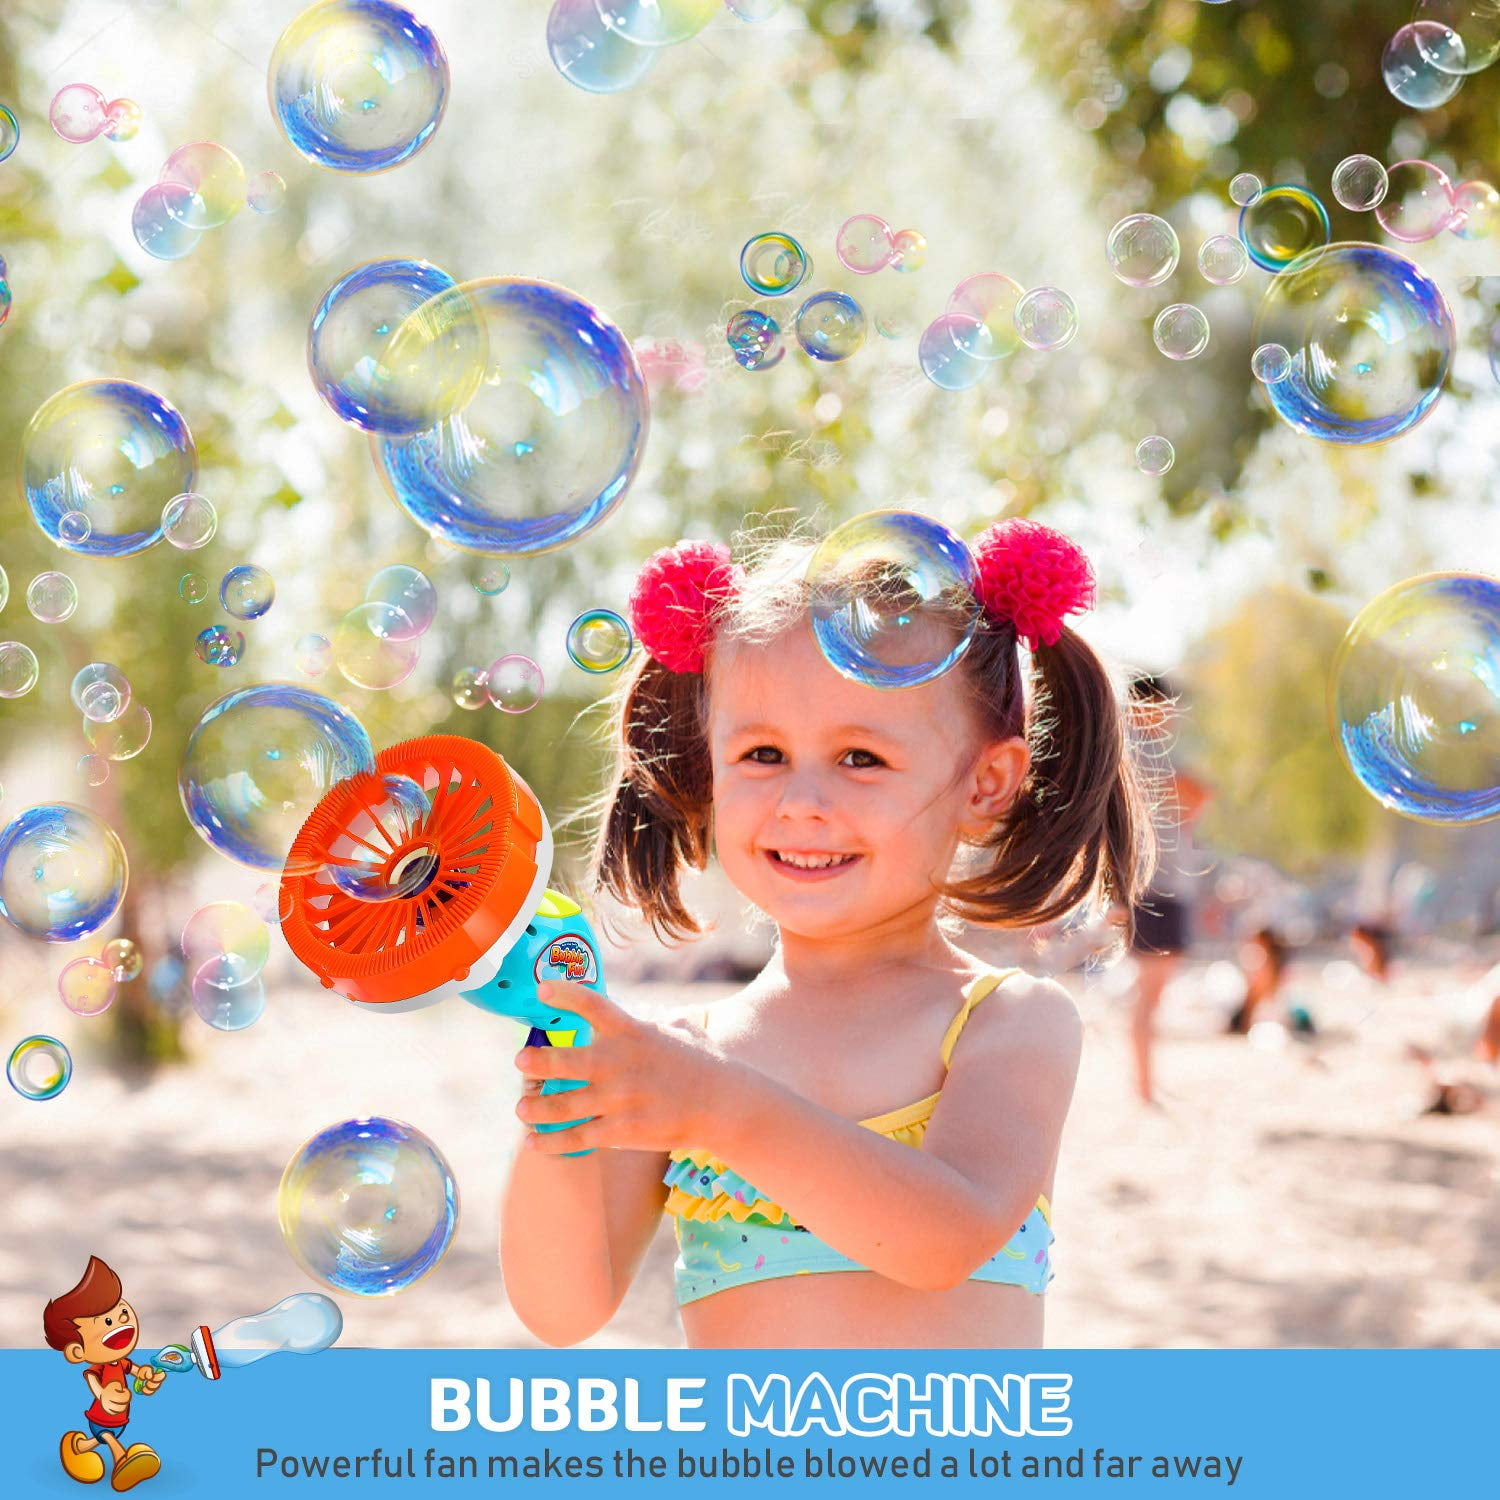  Bubble Gun,Bubble Machine for Kids Big 5 Hole Fish Bubble  Blower with 125ml Solution/Music/Colorful LED Light,10000+ Bubbles Per  Minute,Bubble Maker for Wedding,Boys Girls Toys Gifts,Birthday, Parties :  Toys & Games